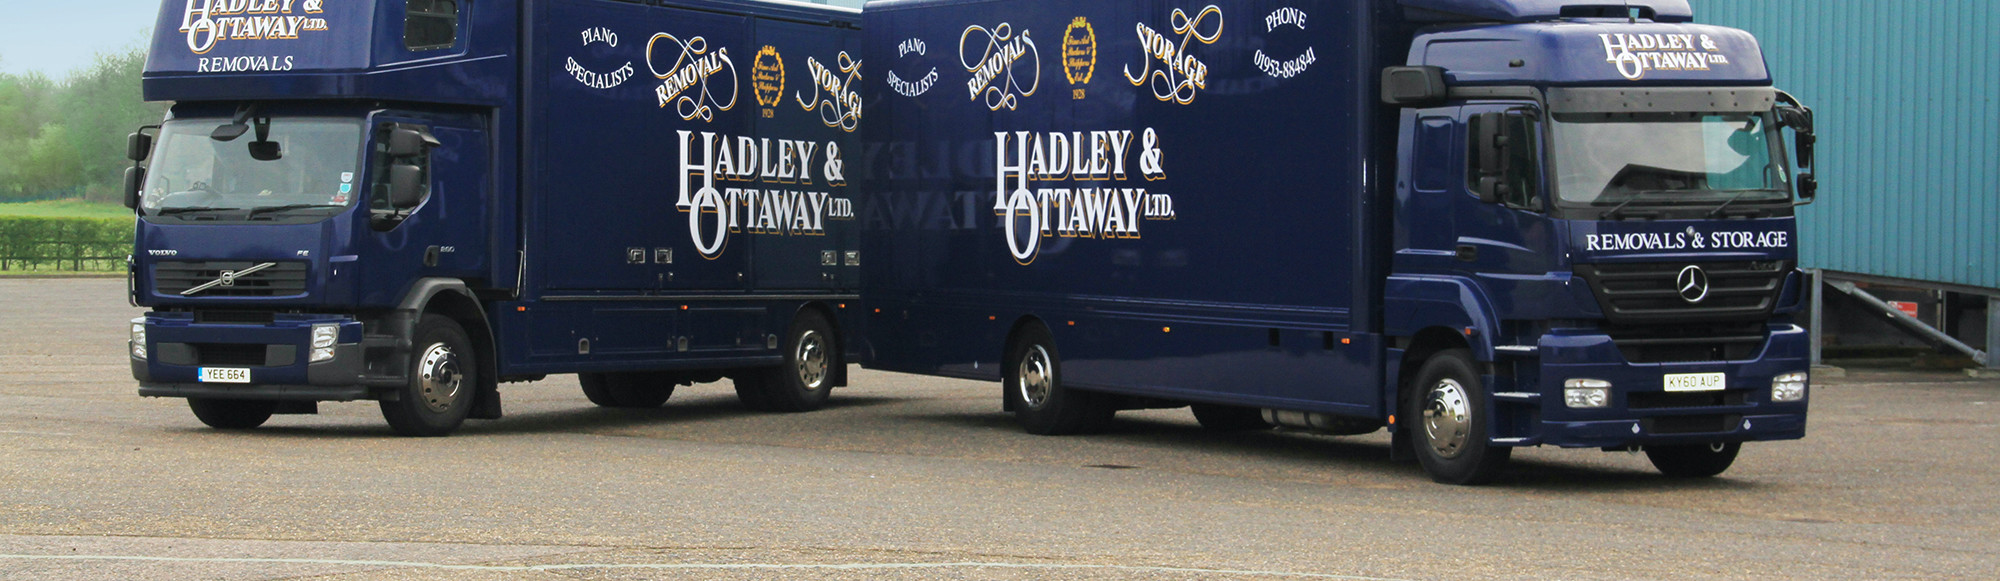 hadley and ottaway corporate and business removals